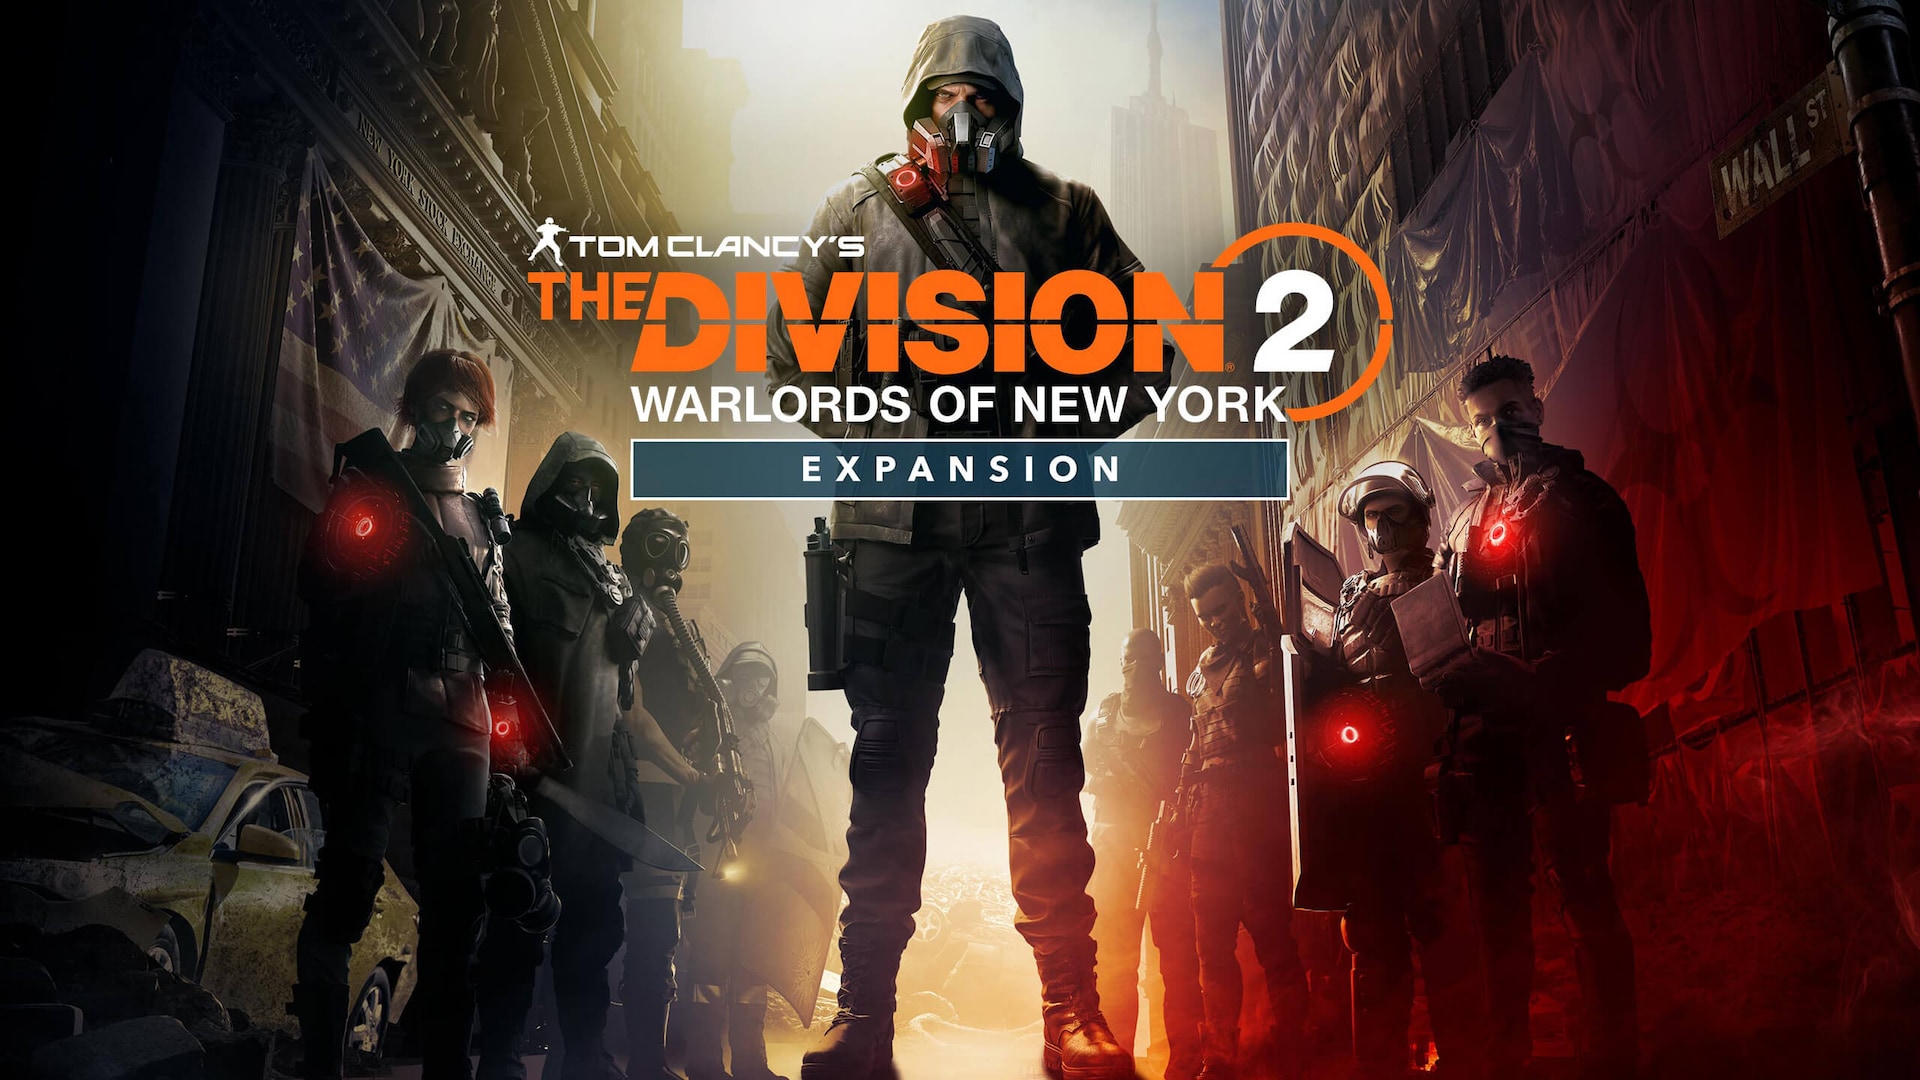 Tom Clancy's The Division 2 
Хардкор